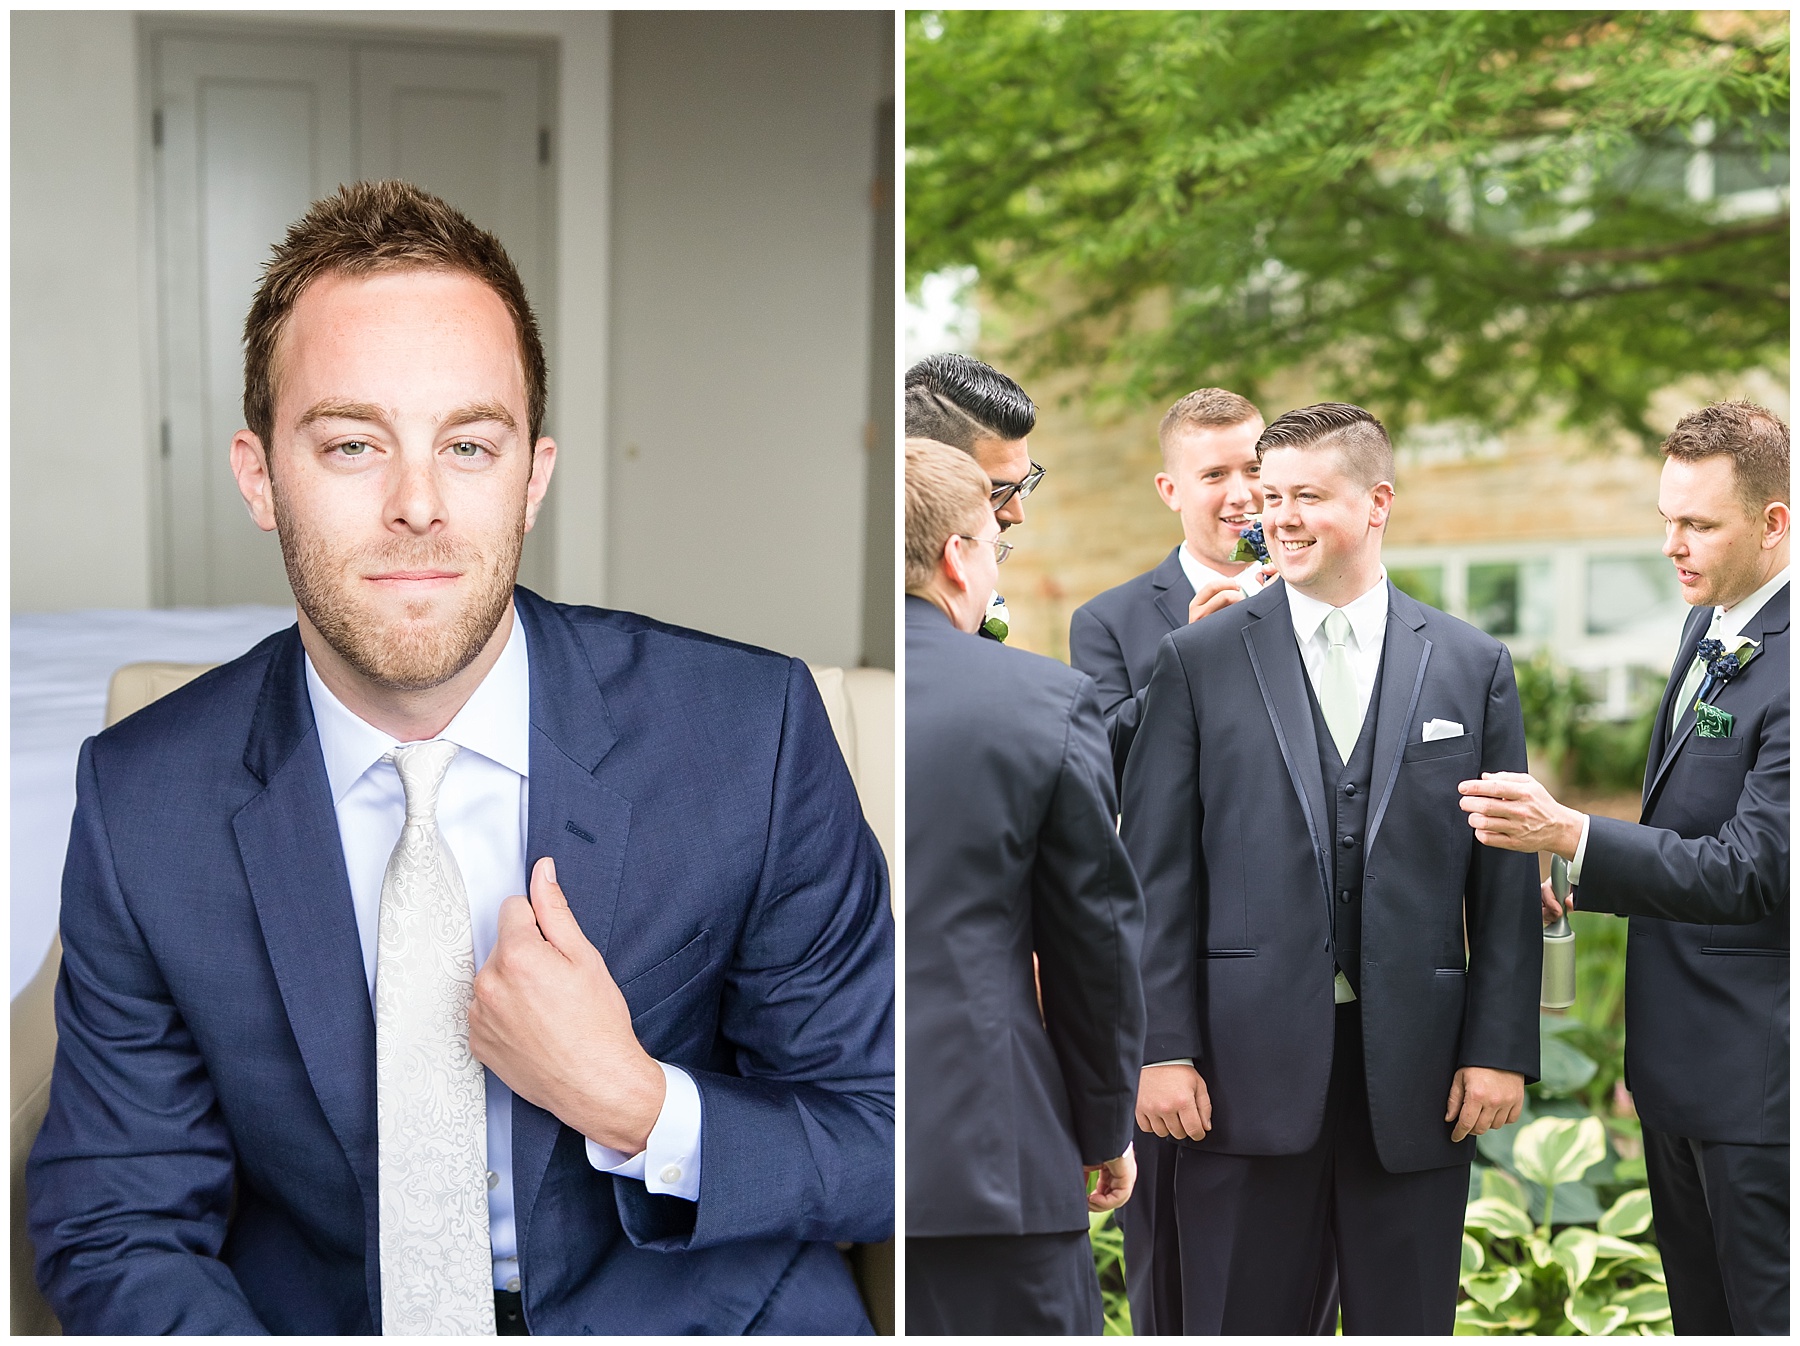 Groom smiling at camera while holding lapel of navy suit jacket in the 2018 wedding photography favorites